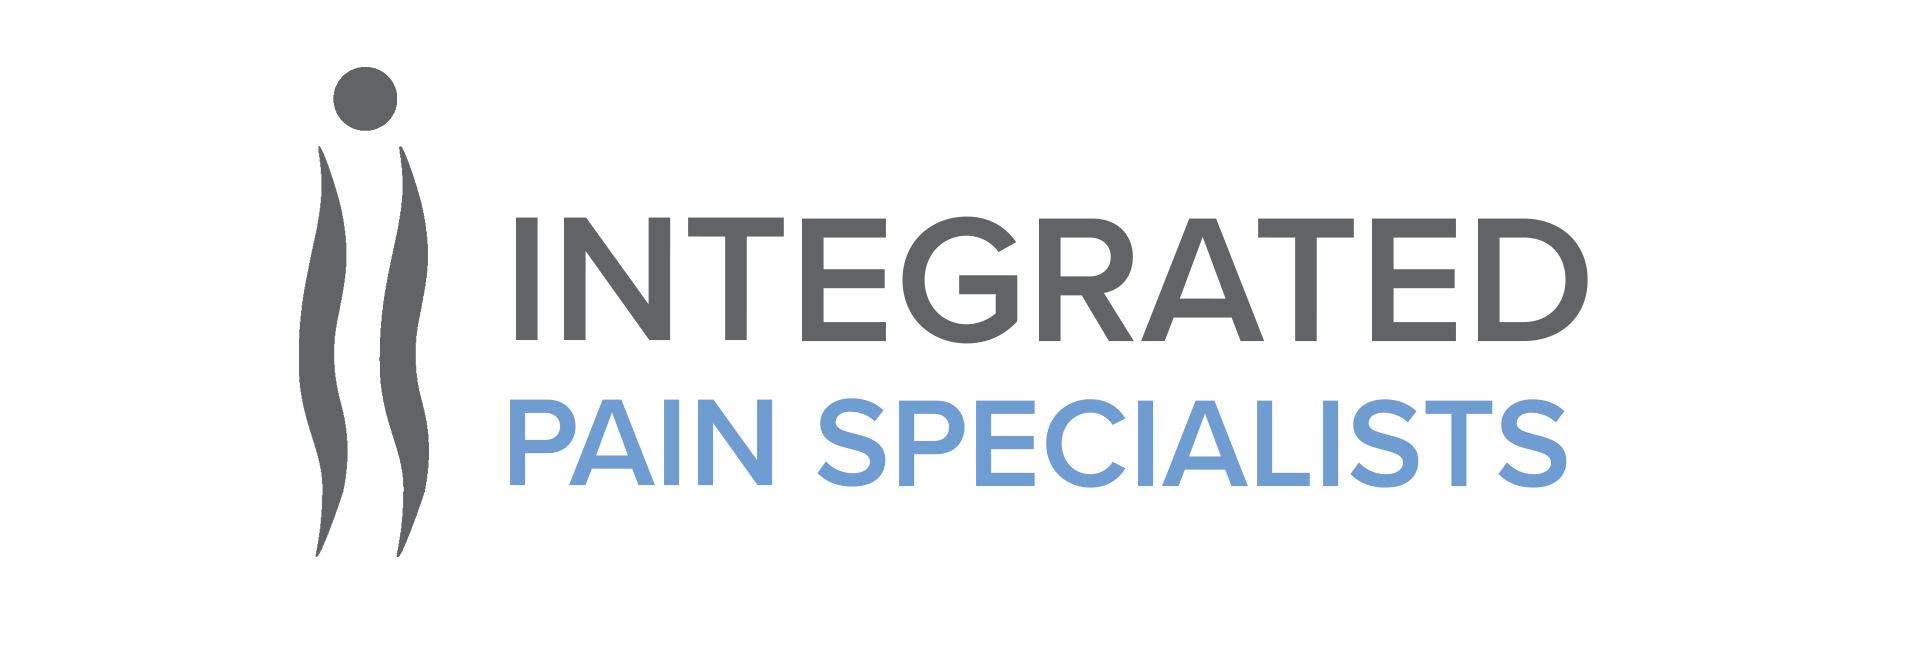 Integrated Pain Specialists